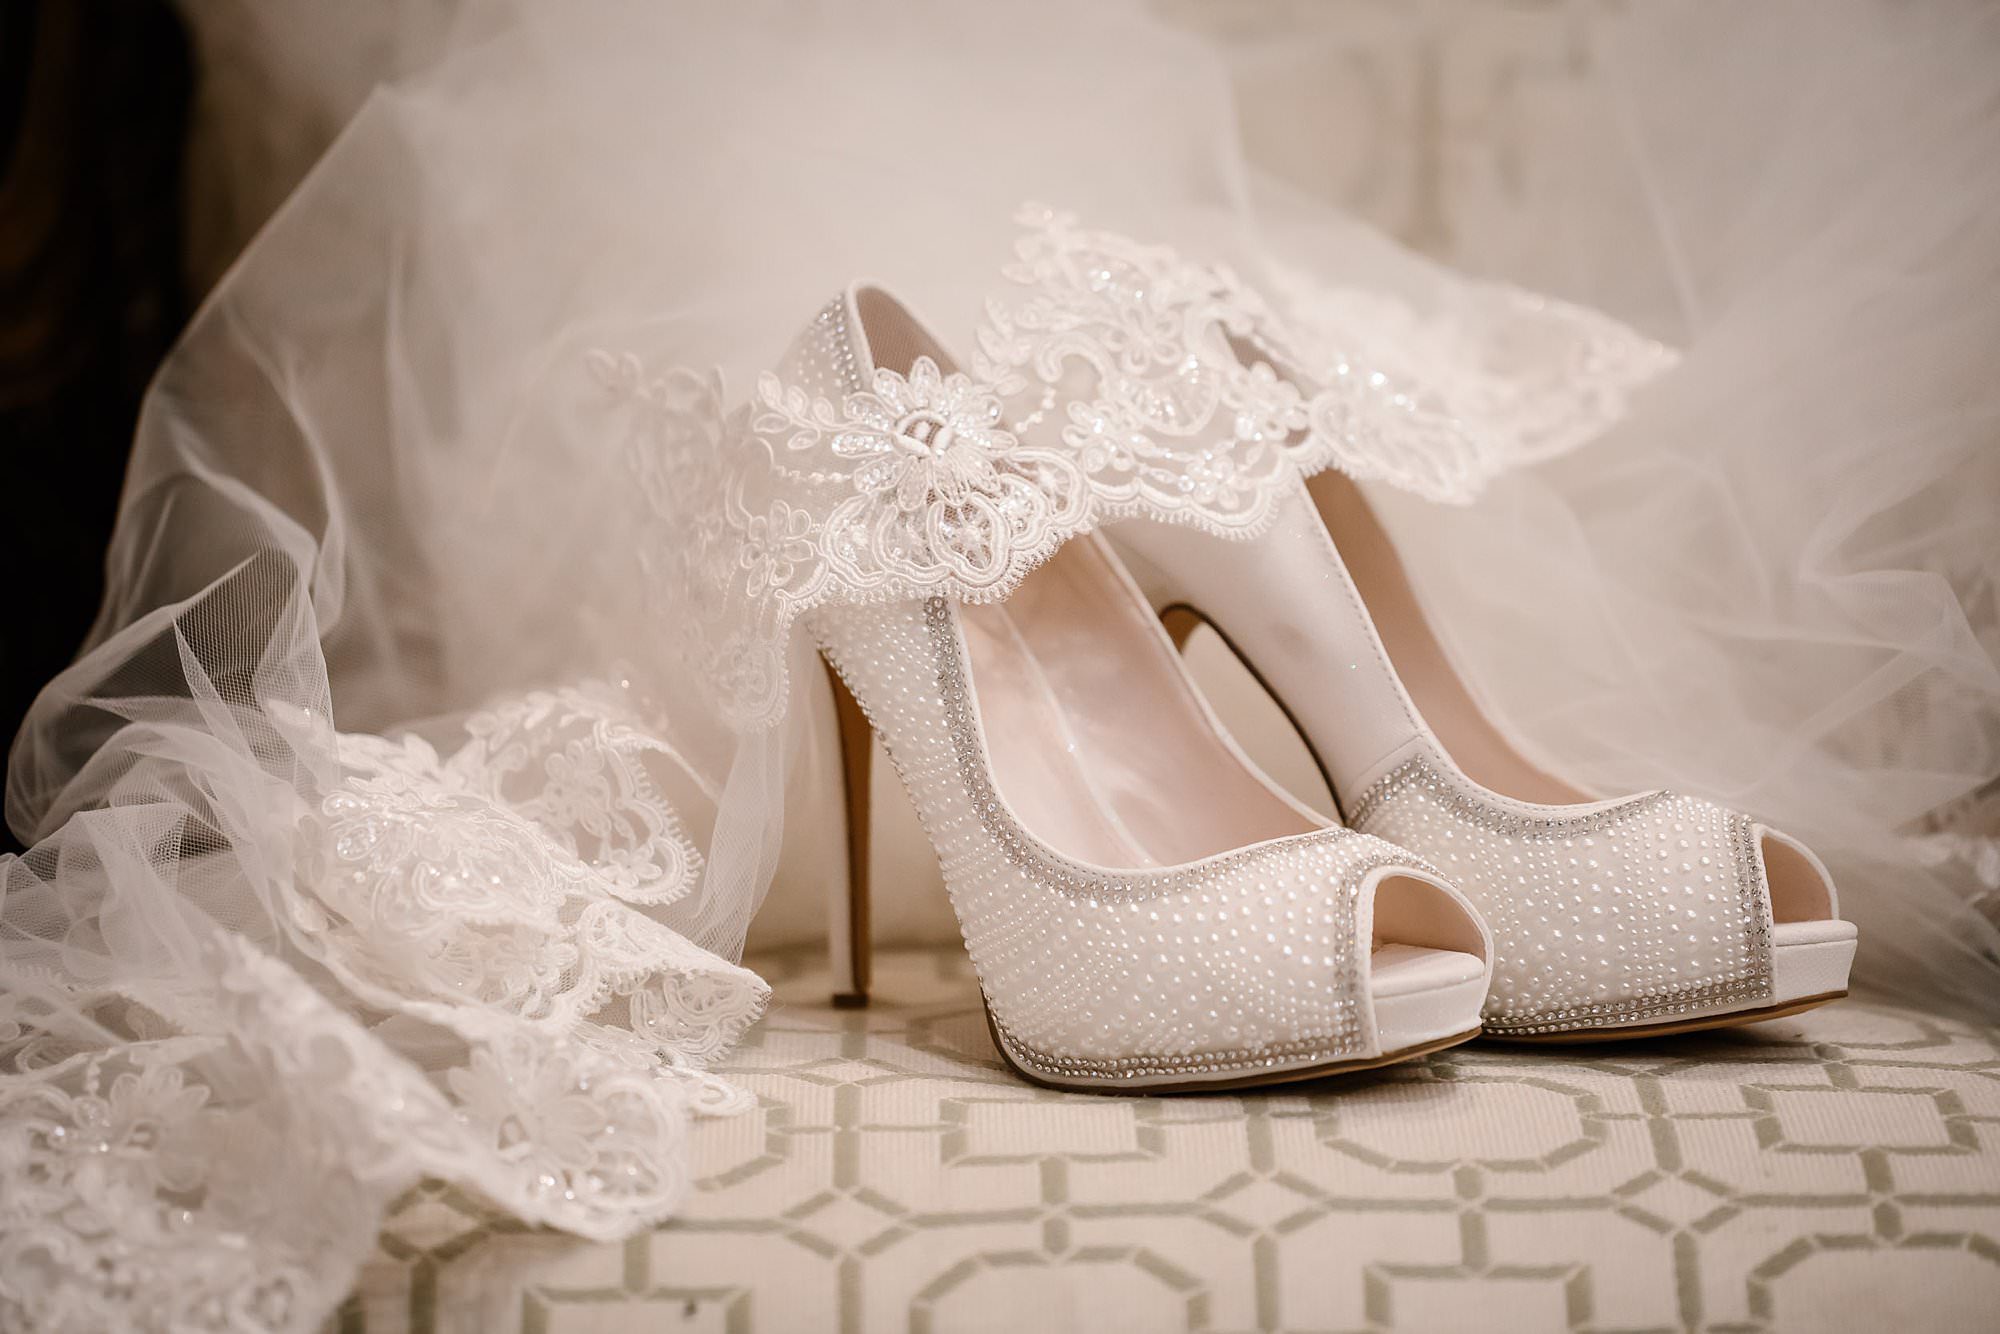 Lace veil and white heels on a chair in the bridal suite